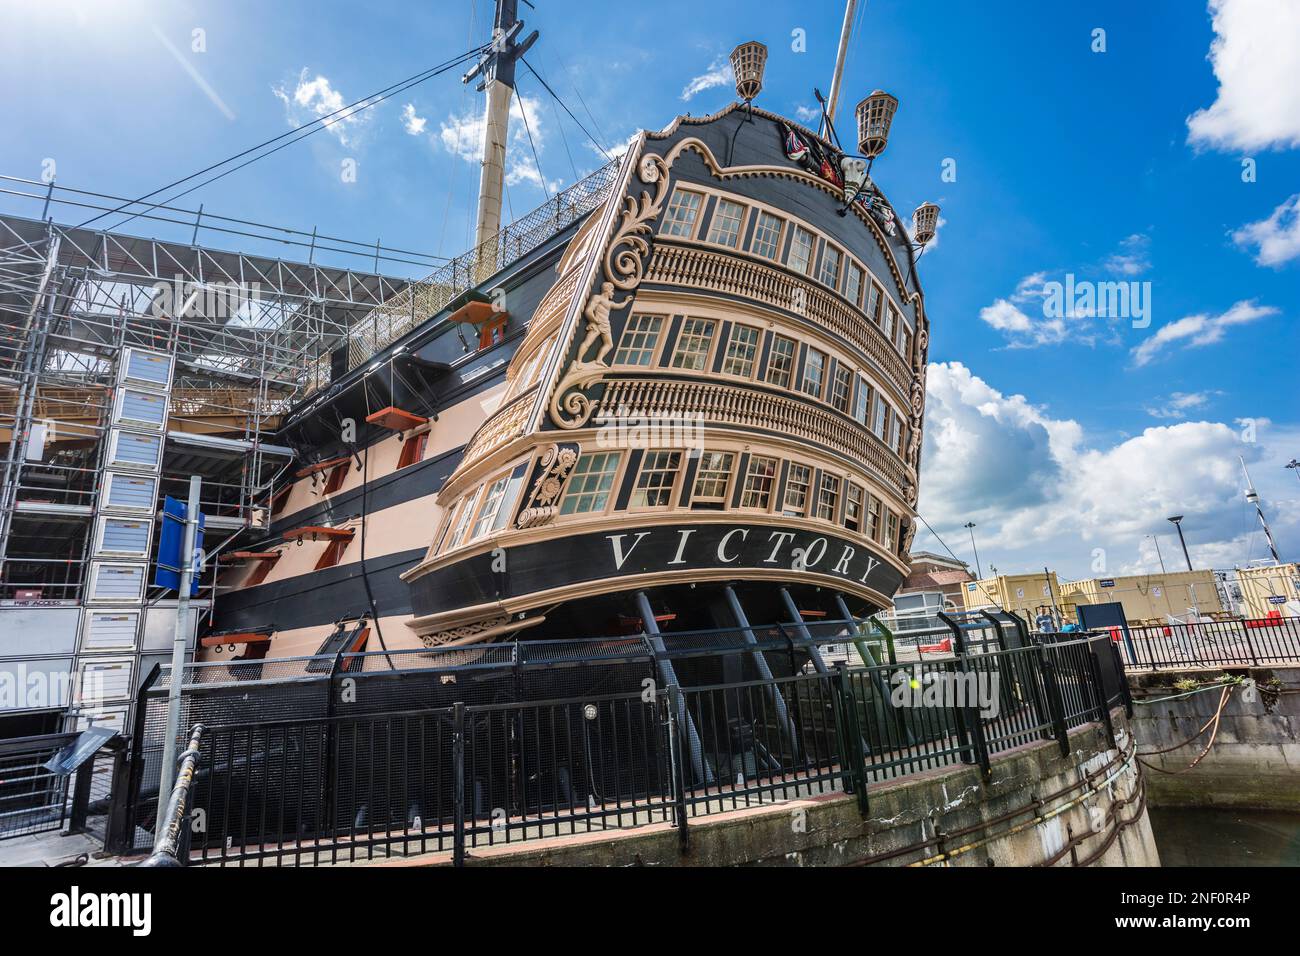 stern gallery of HMS Victory, museum ship at at Portsmouth Historic Dockyard, Hampshire, South East England Stock Photo